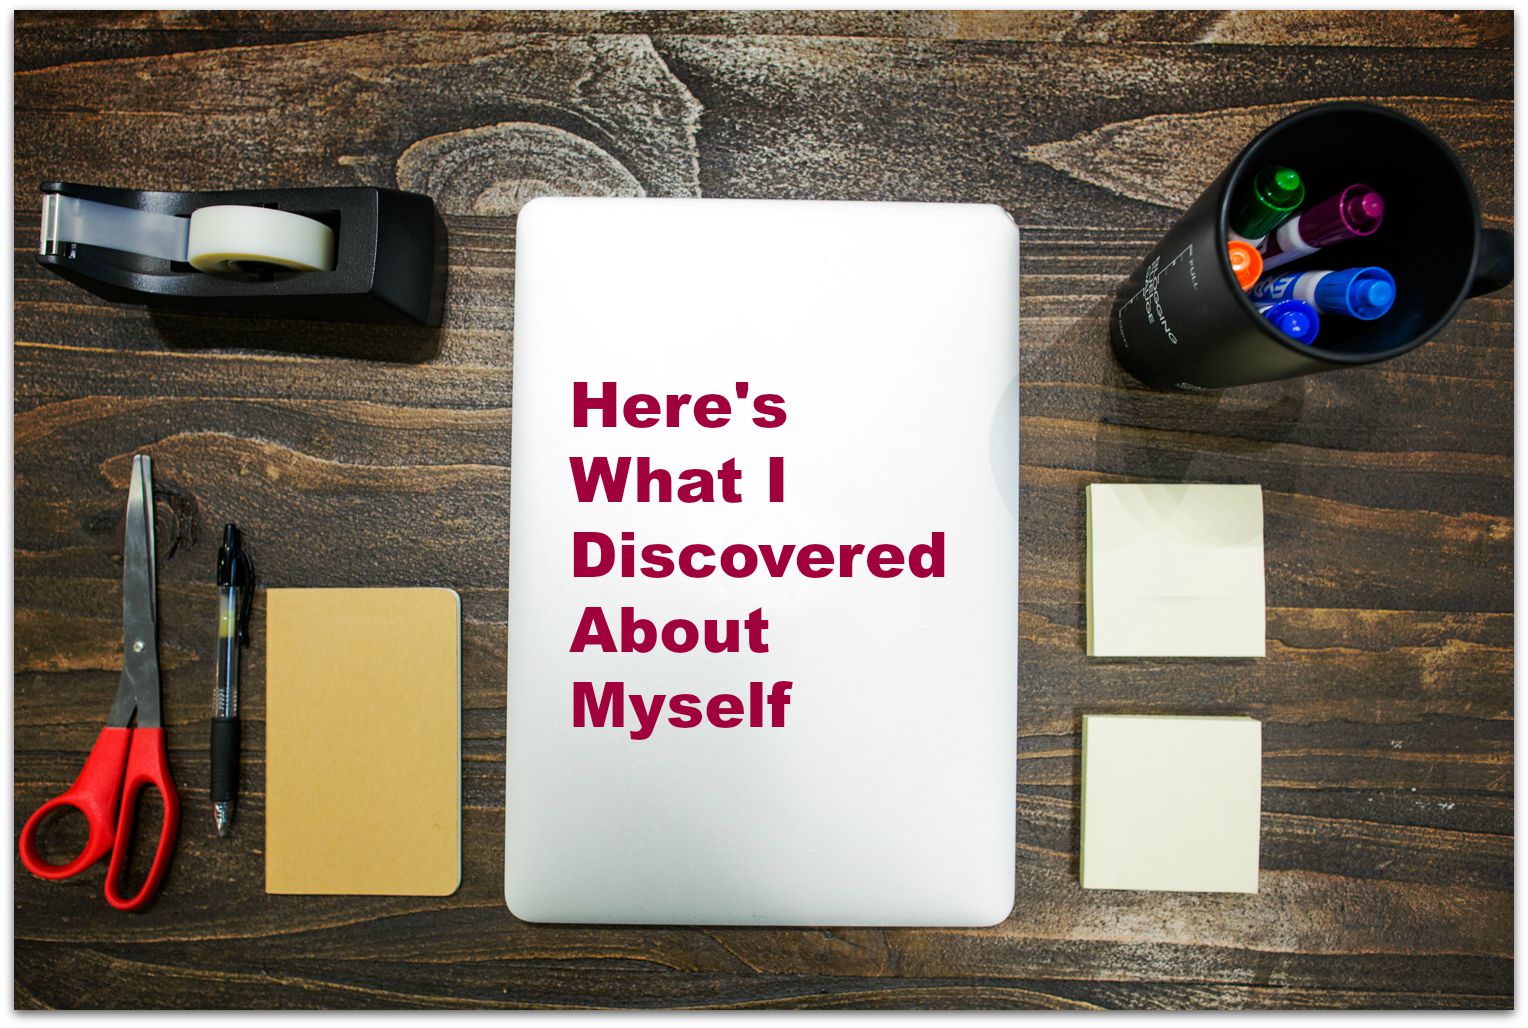 Overhead desk-top photo showing tablet with this message: "Here's what I discovered about myself"